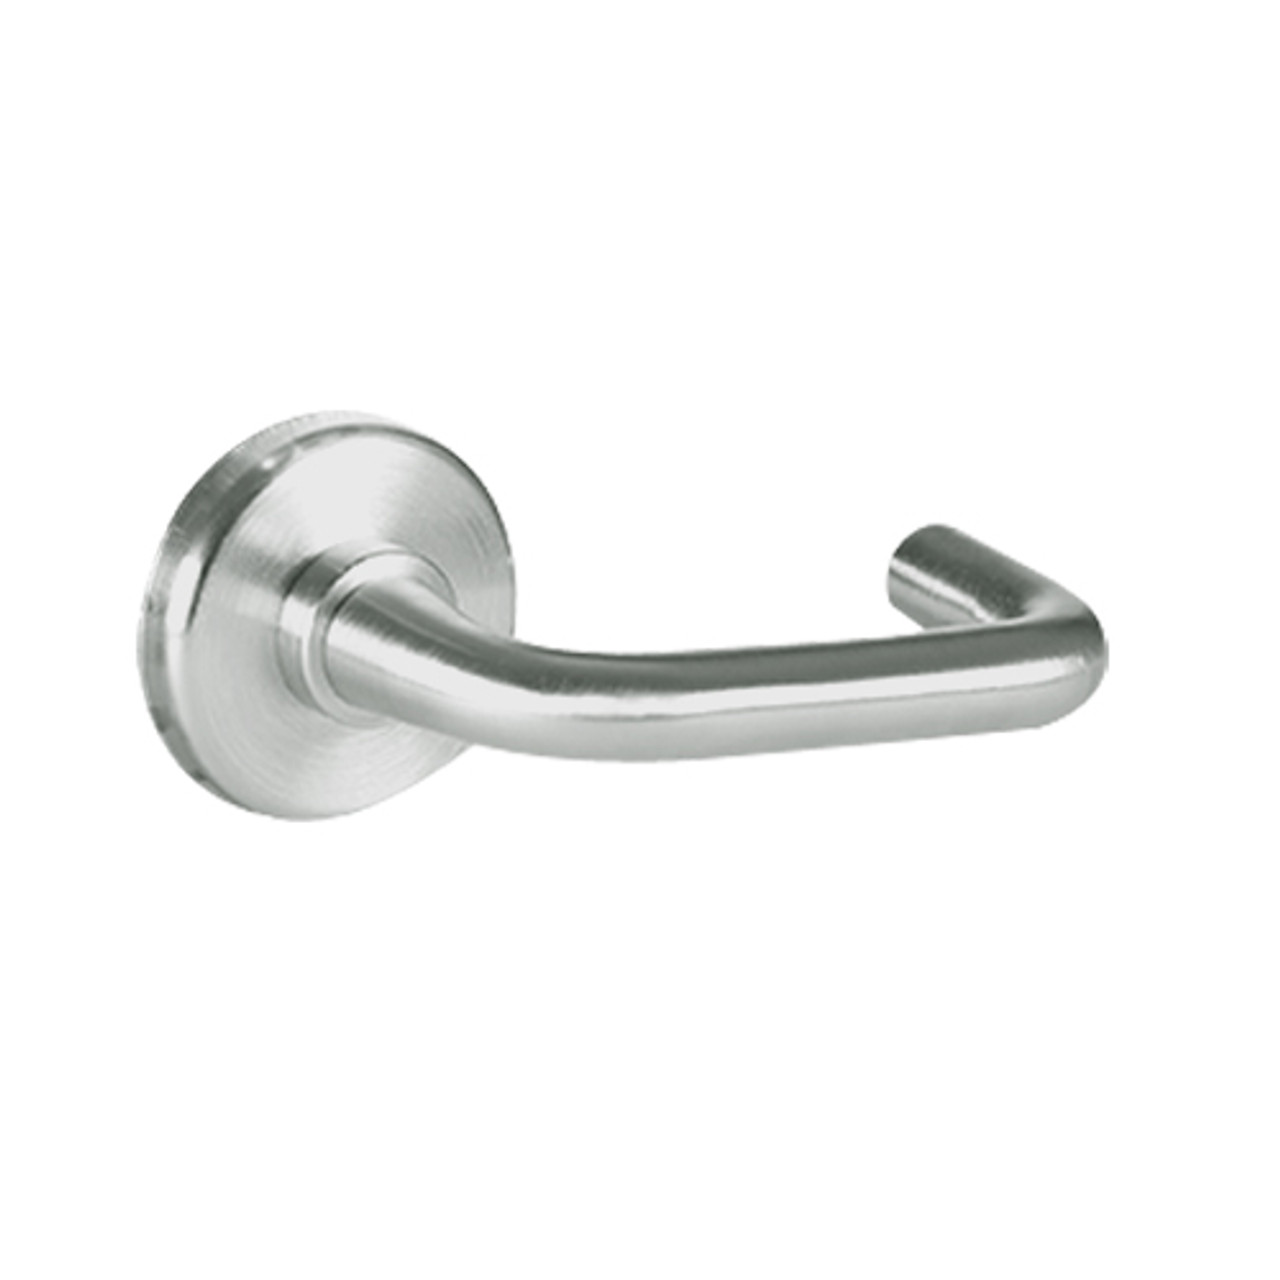 40HTKIS13S619 Best 40H Series Trim Kits Inside Lever Only with Solid Tube-Return Trim Style in Satin Nickel